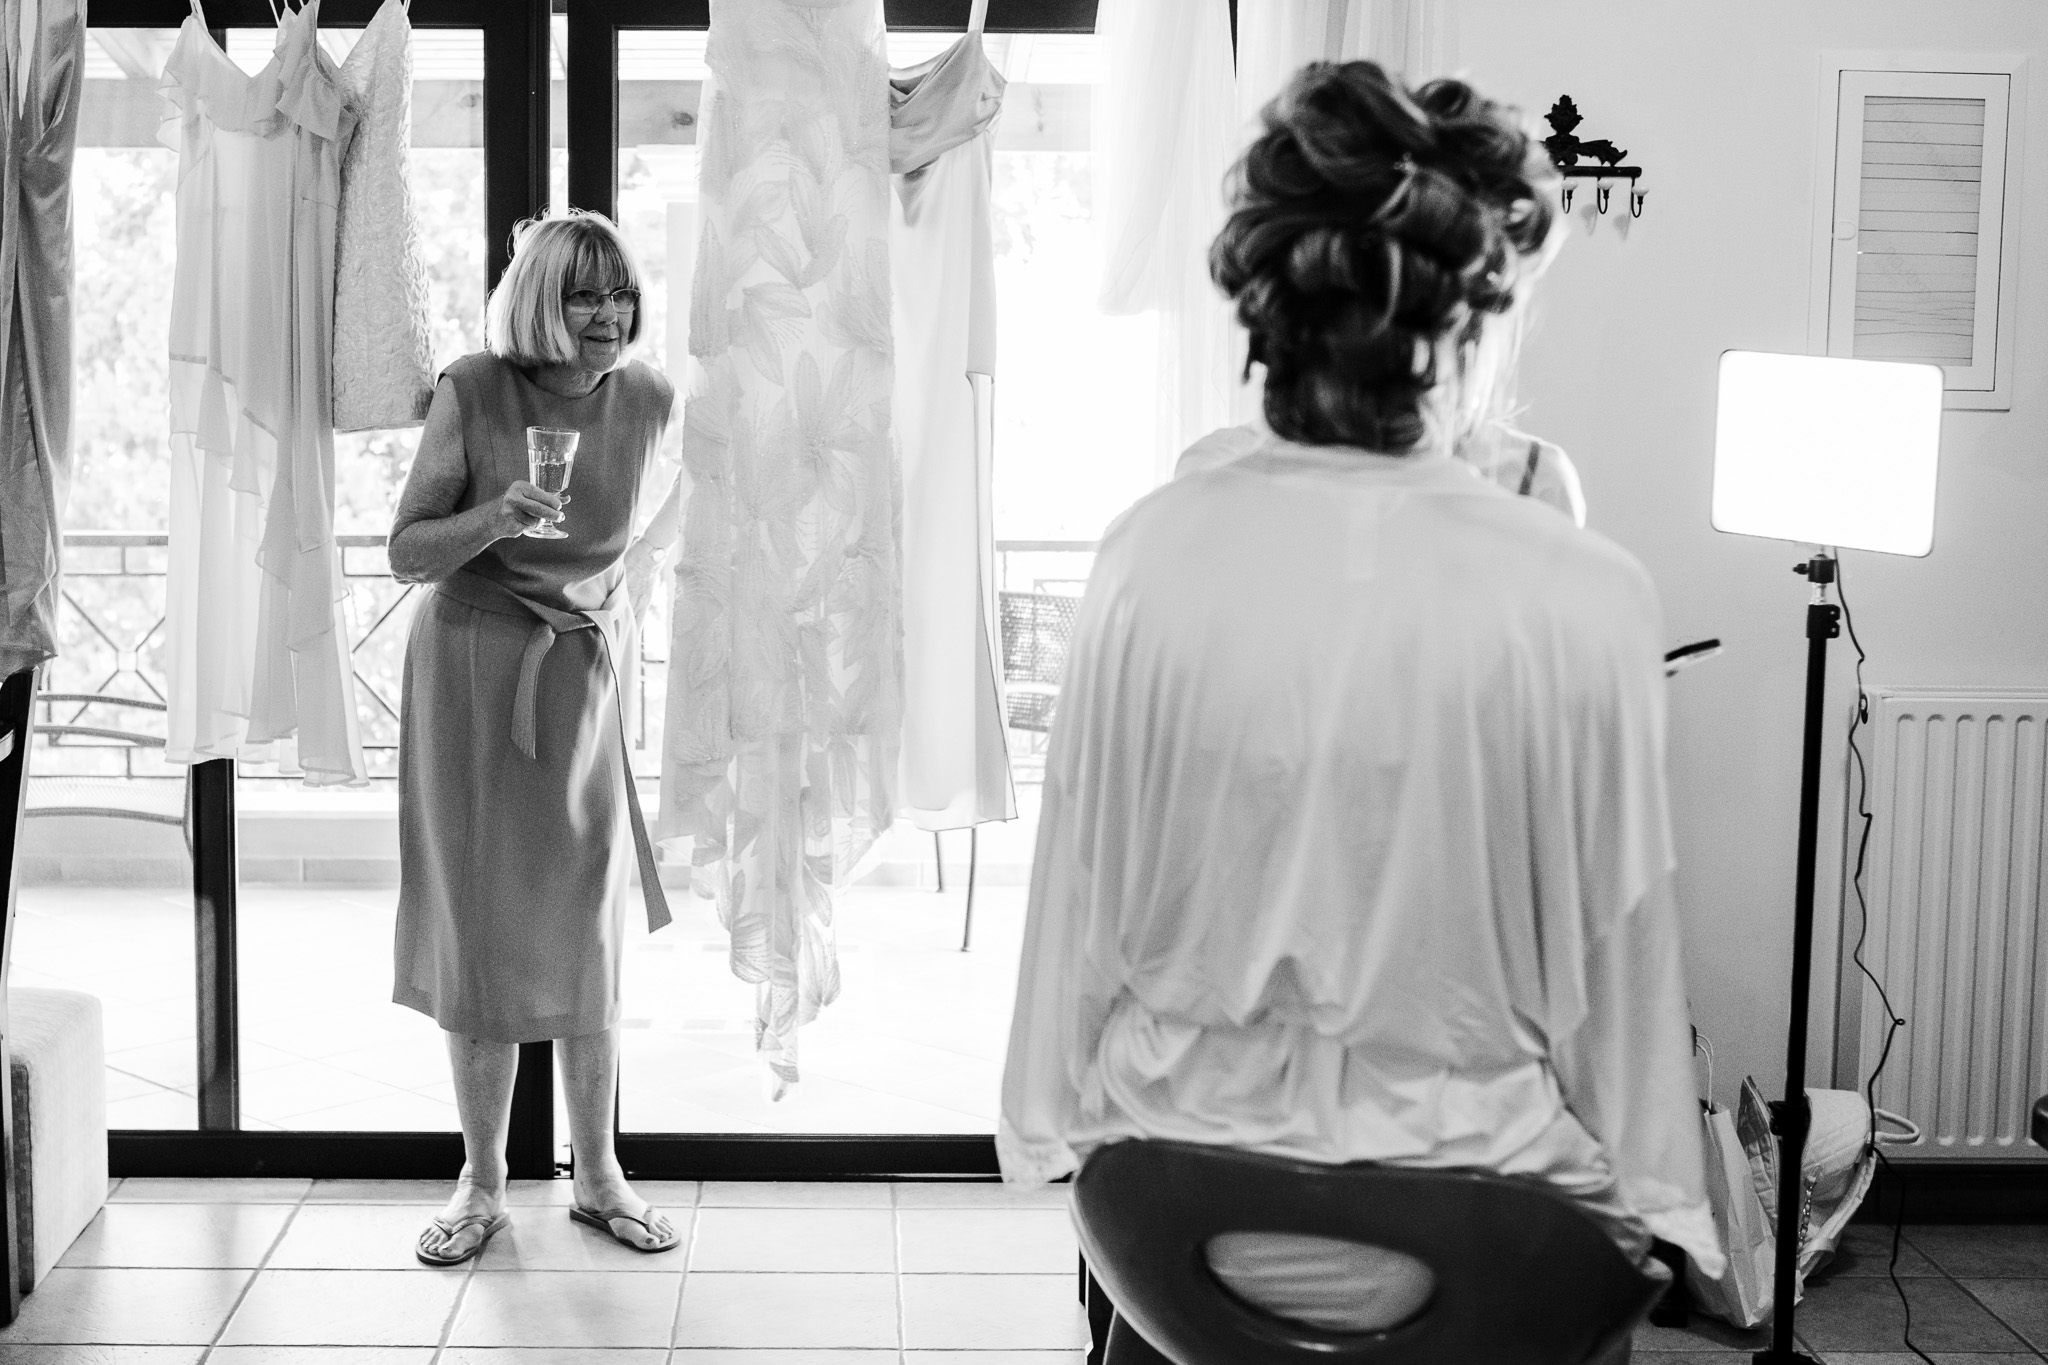 Alice's mum comes through the sliding doors and see's her daughter getting ready for her wedding day.